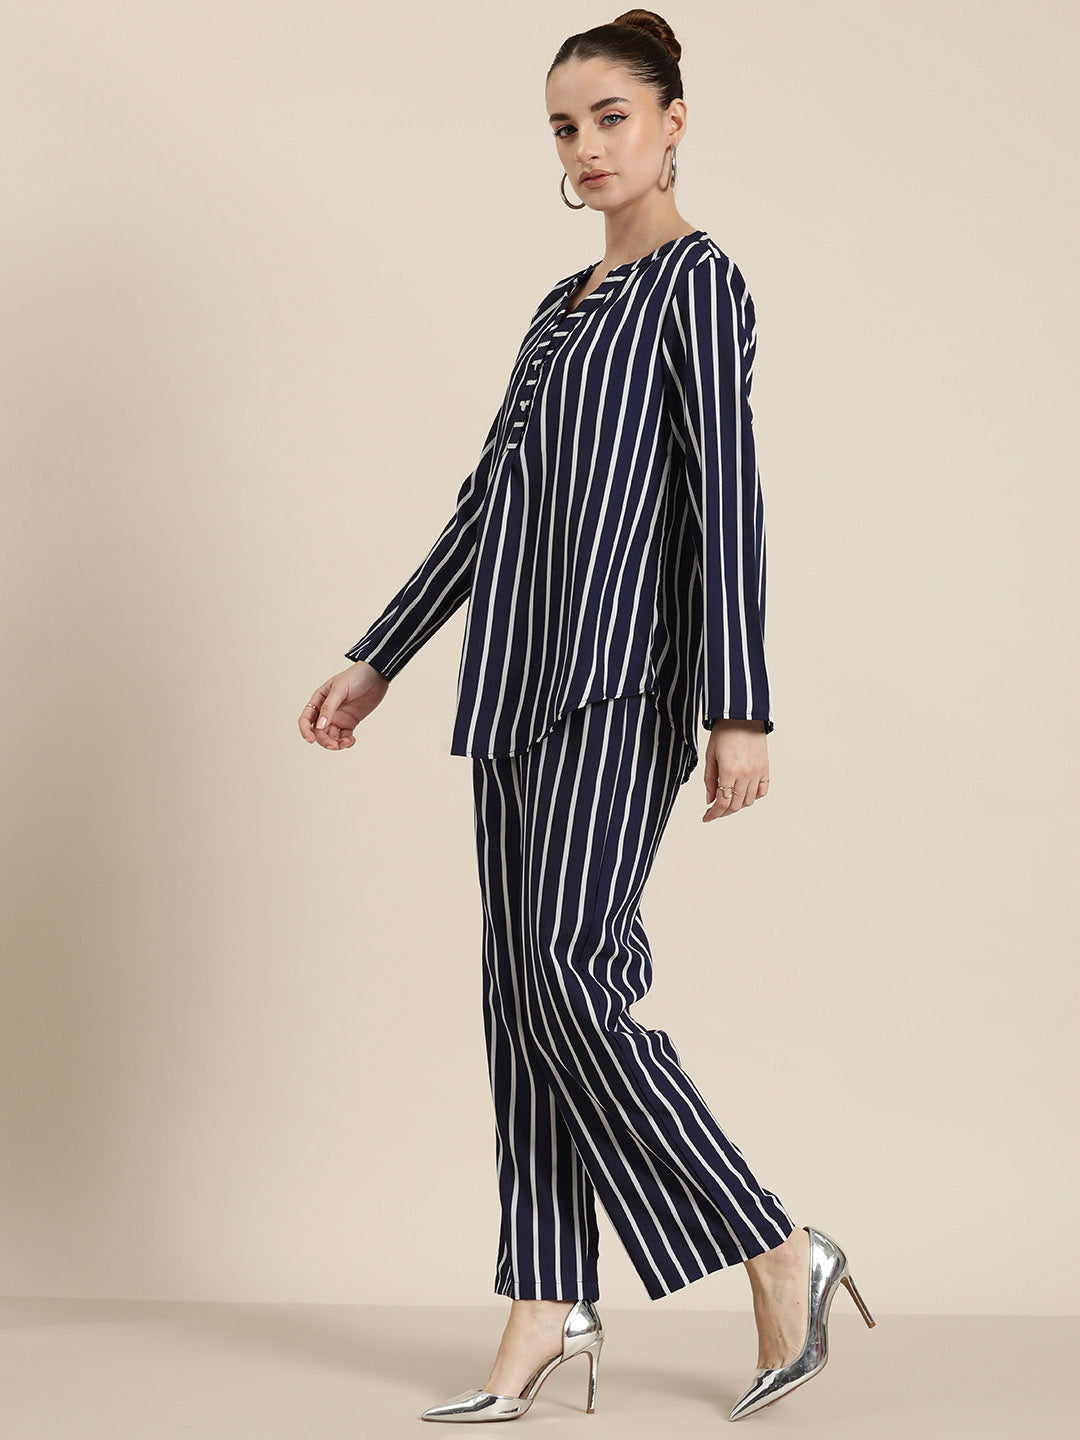 Navy and white stripe crepe shirt with pant co-ord set.